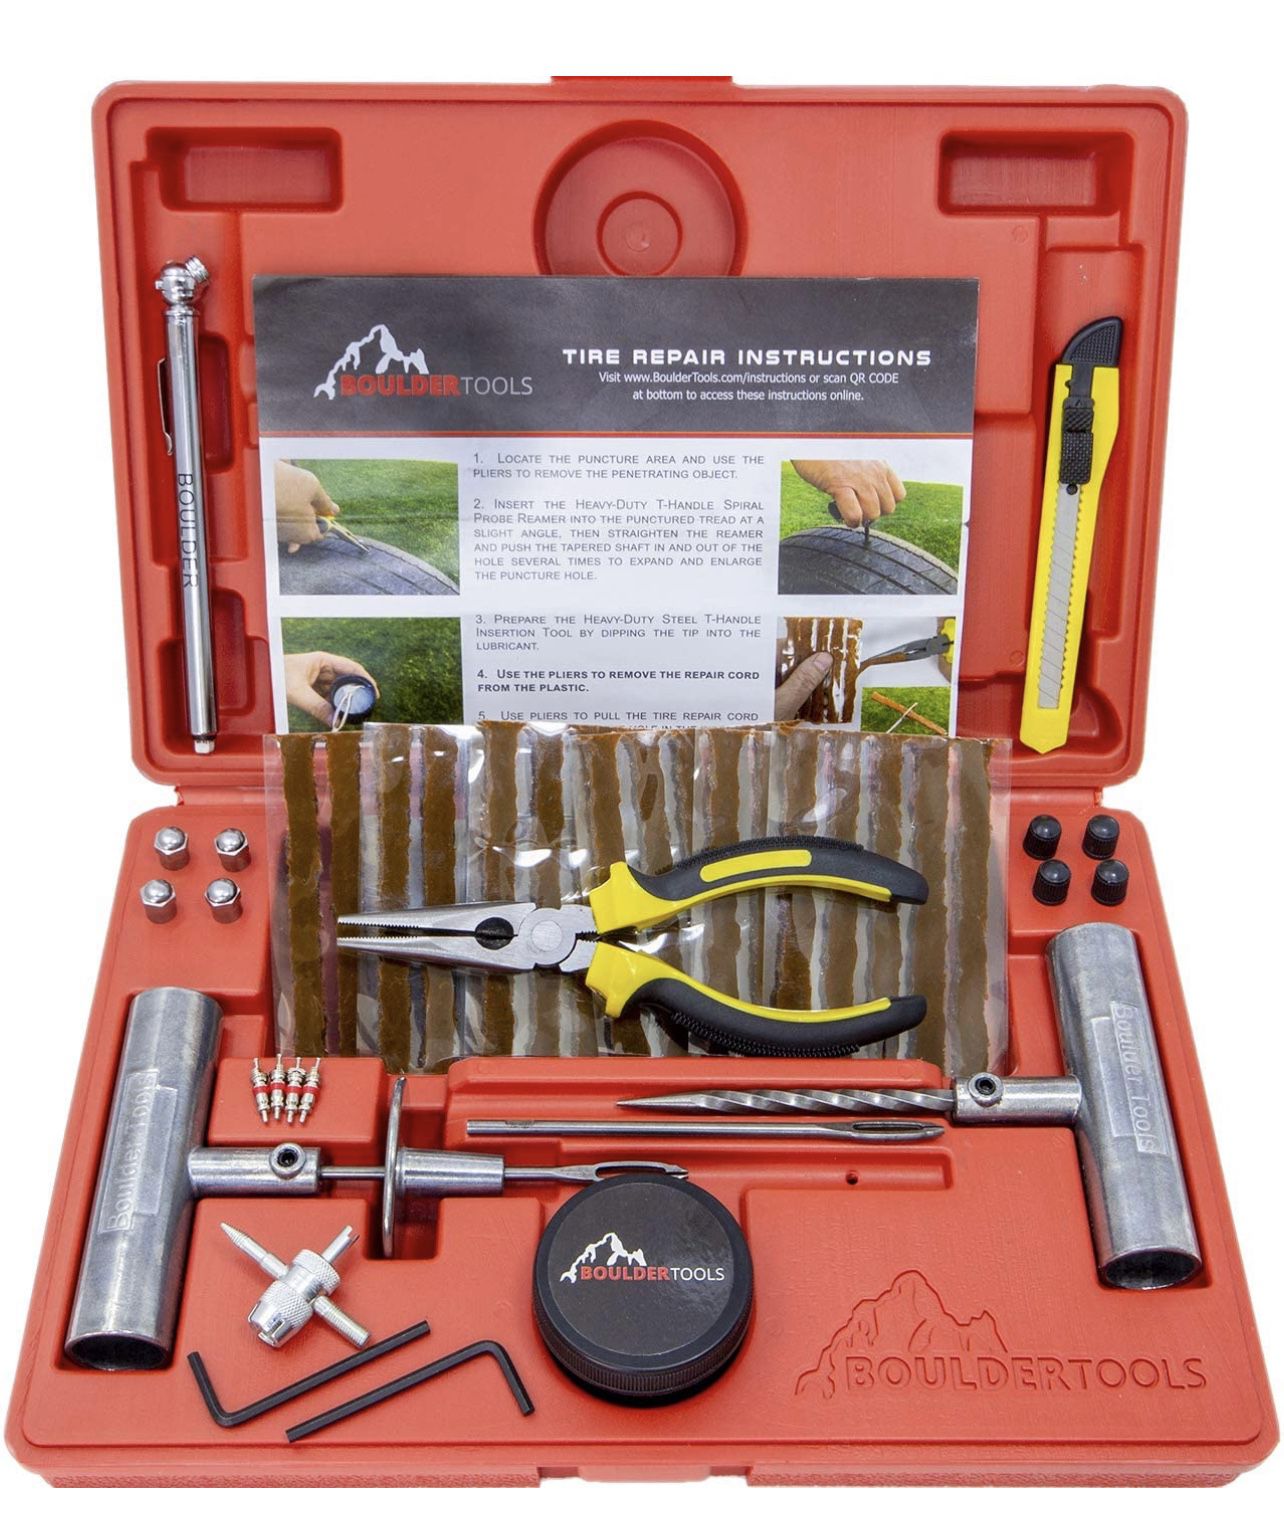 Boulder Tools - Heavy Duty Tire Repair Kit for Car, Truck, RV, SUV, ATV, Motorcycle, Tractor, Trailer. Flat Tire Puncture Repair Kit